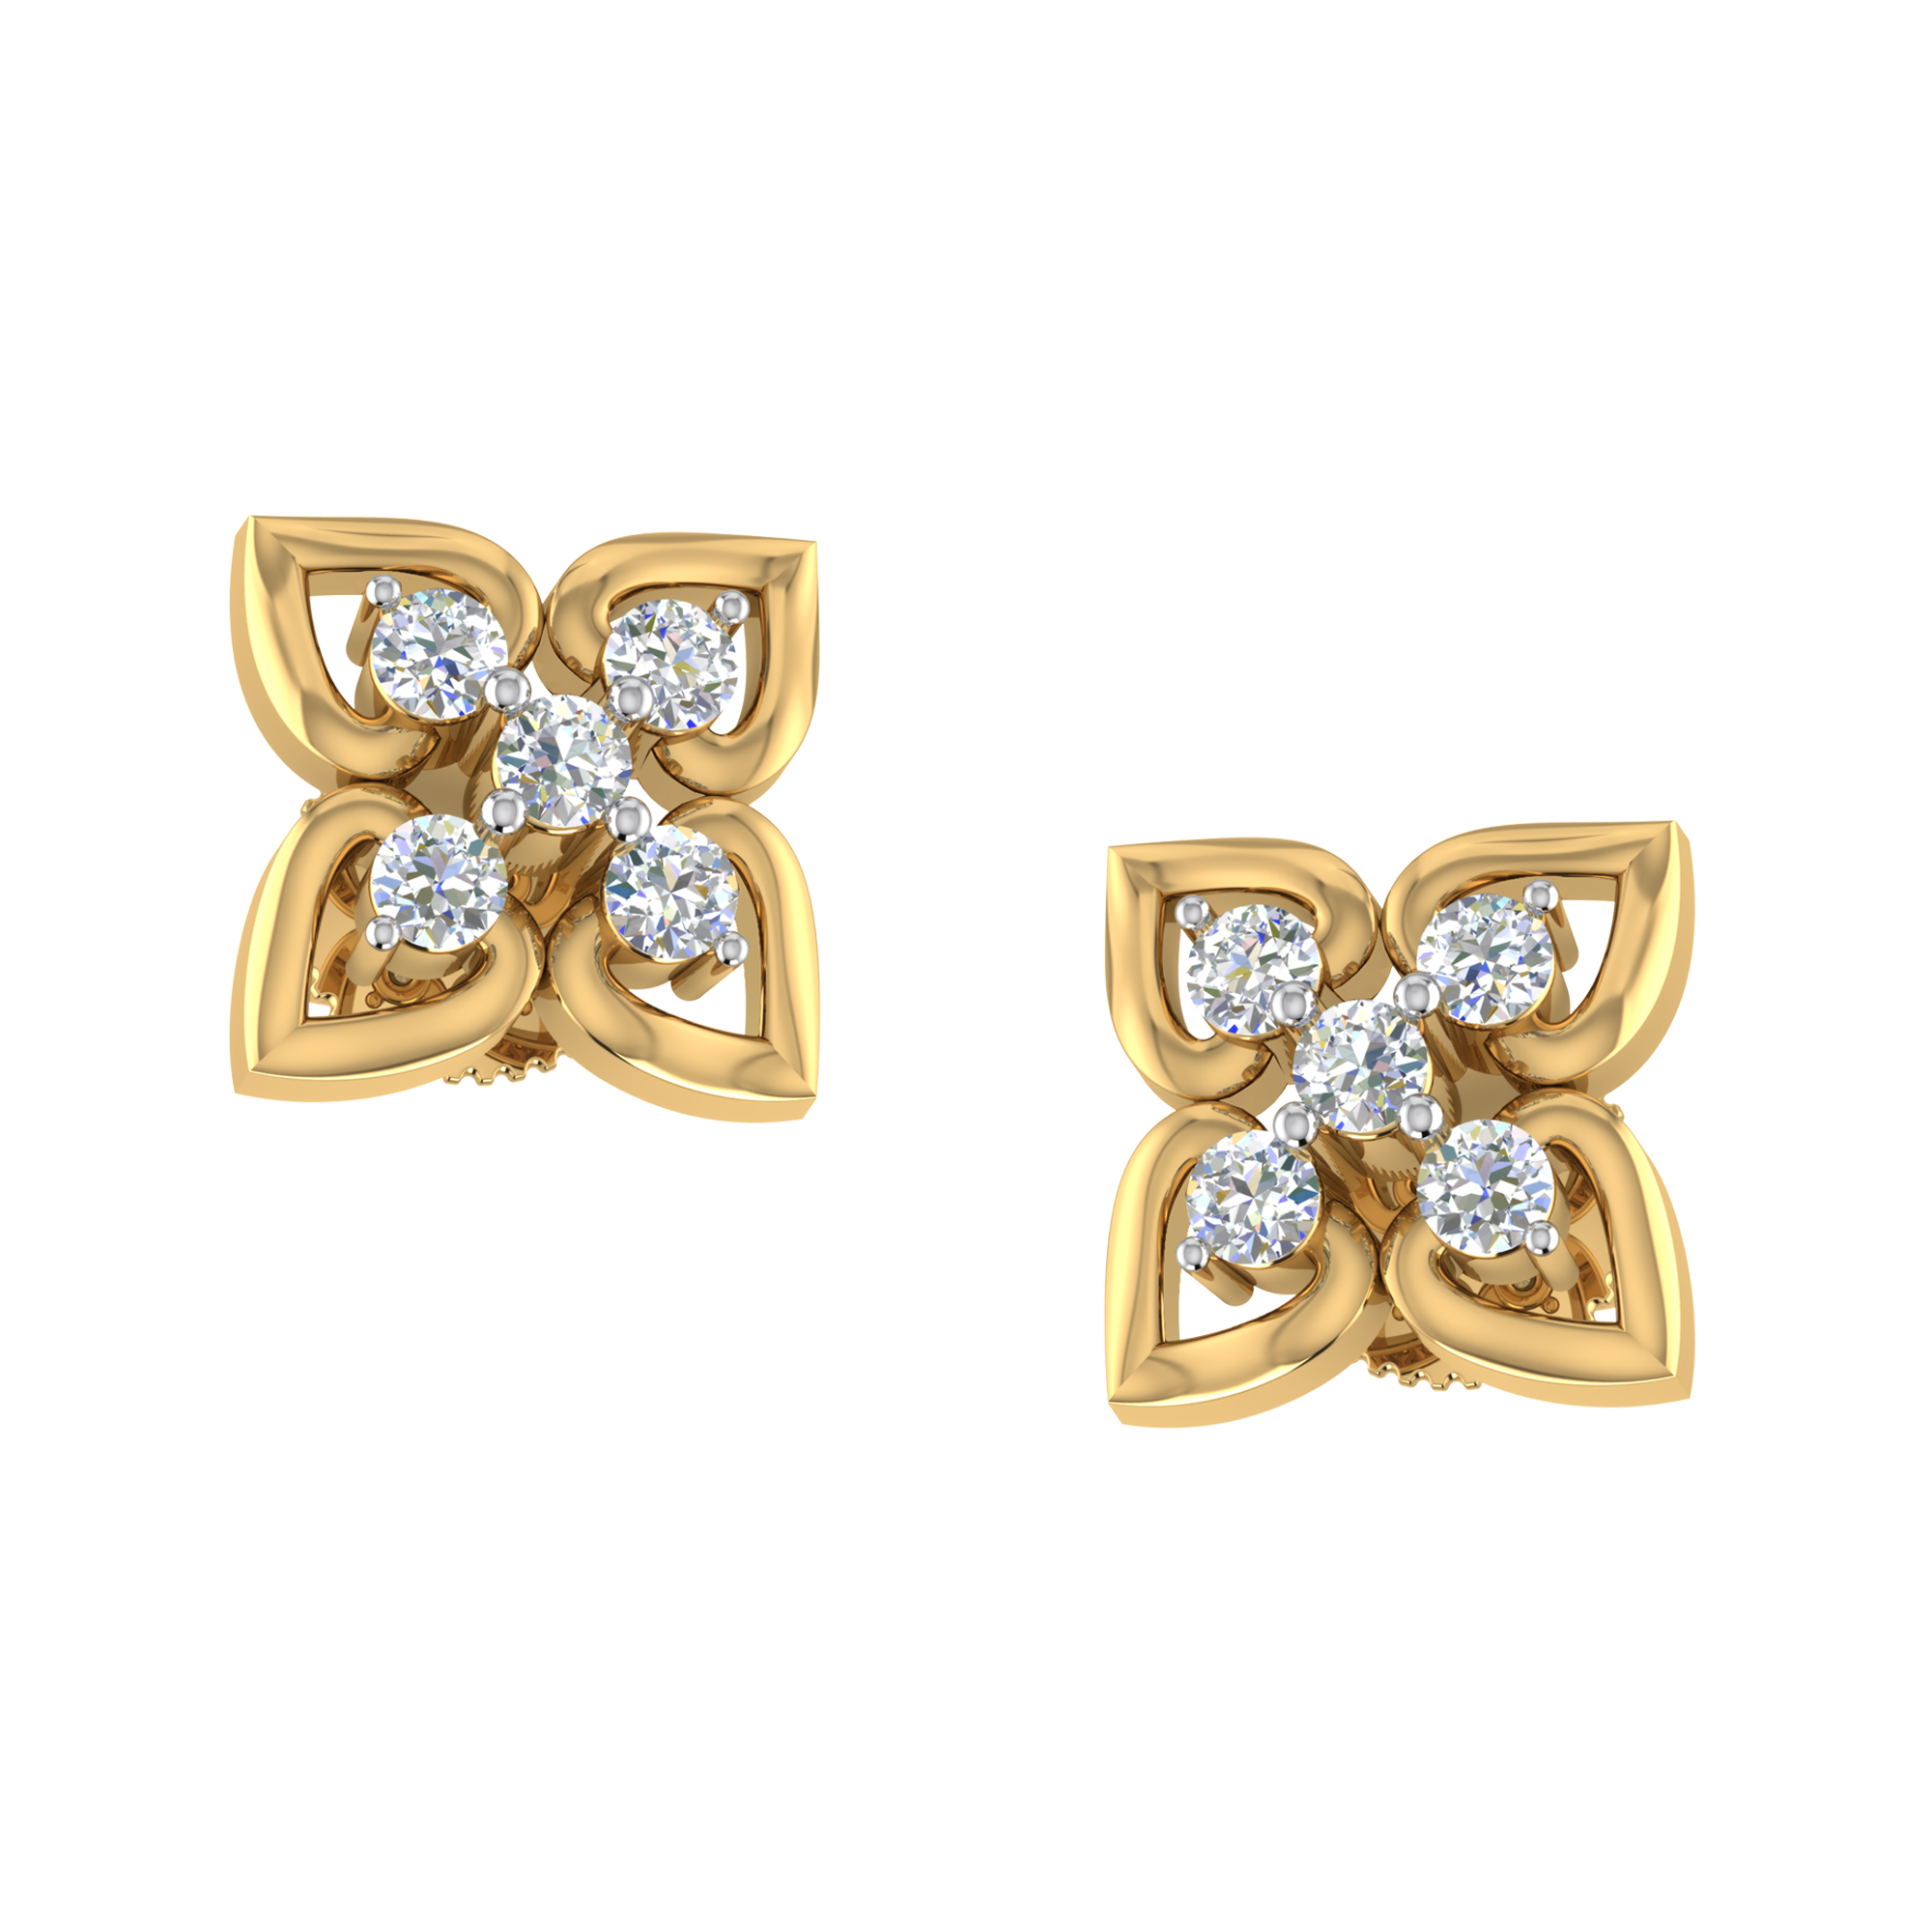 Buy quality The Floral Gold Earring Studs in Pune